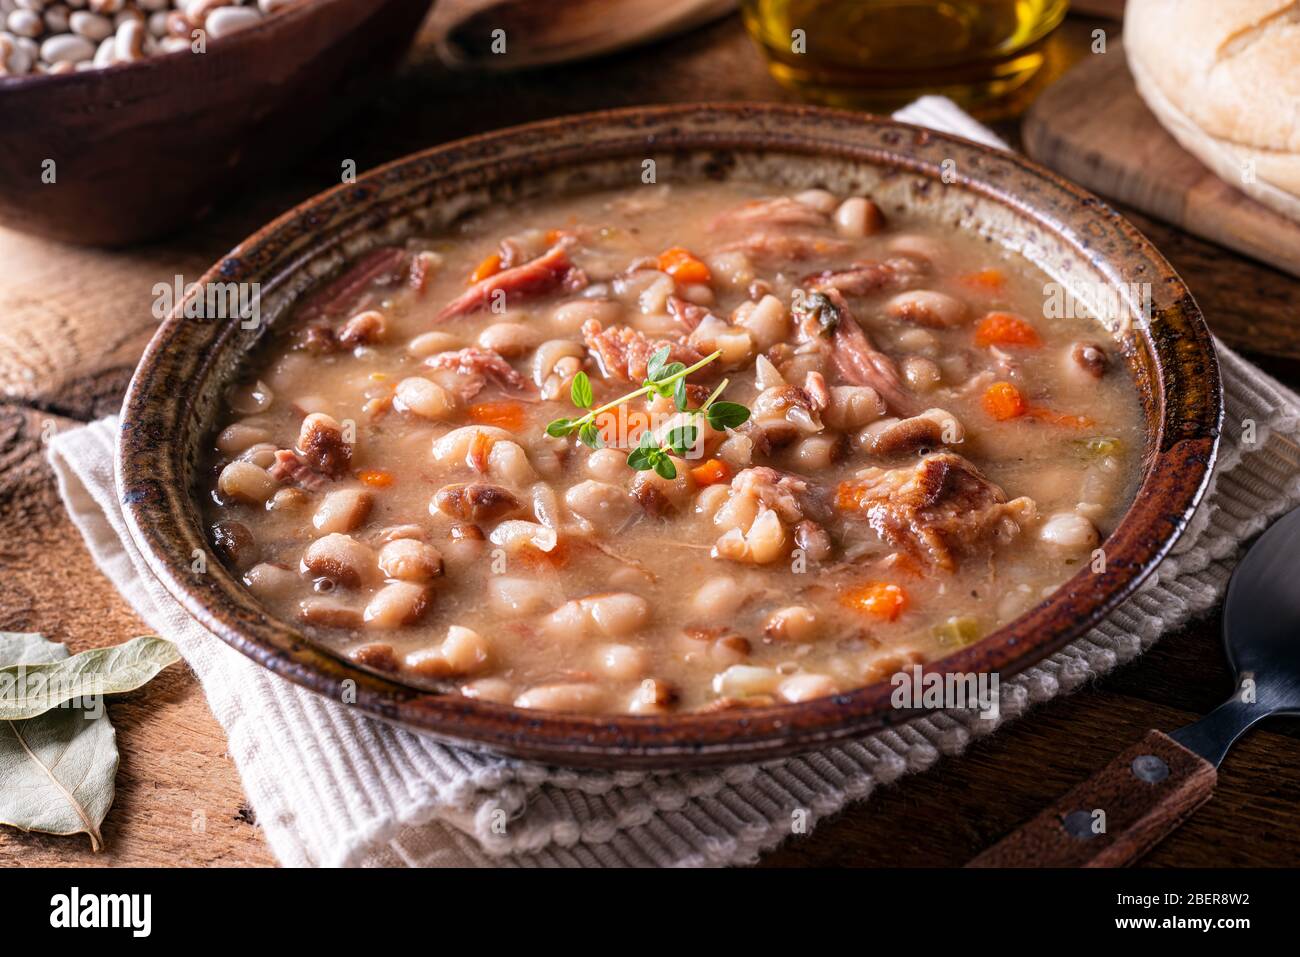 A bowl of delicious homemade bean soup with smoked ham and carrots. Stock Photo